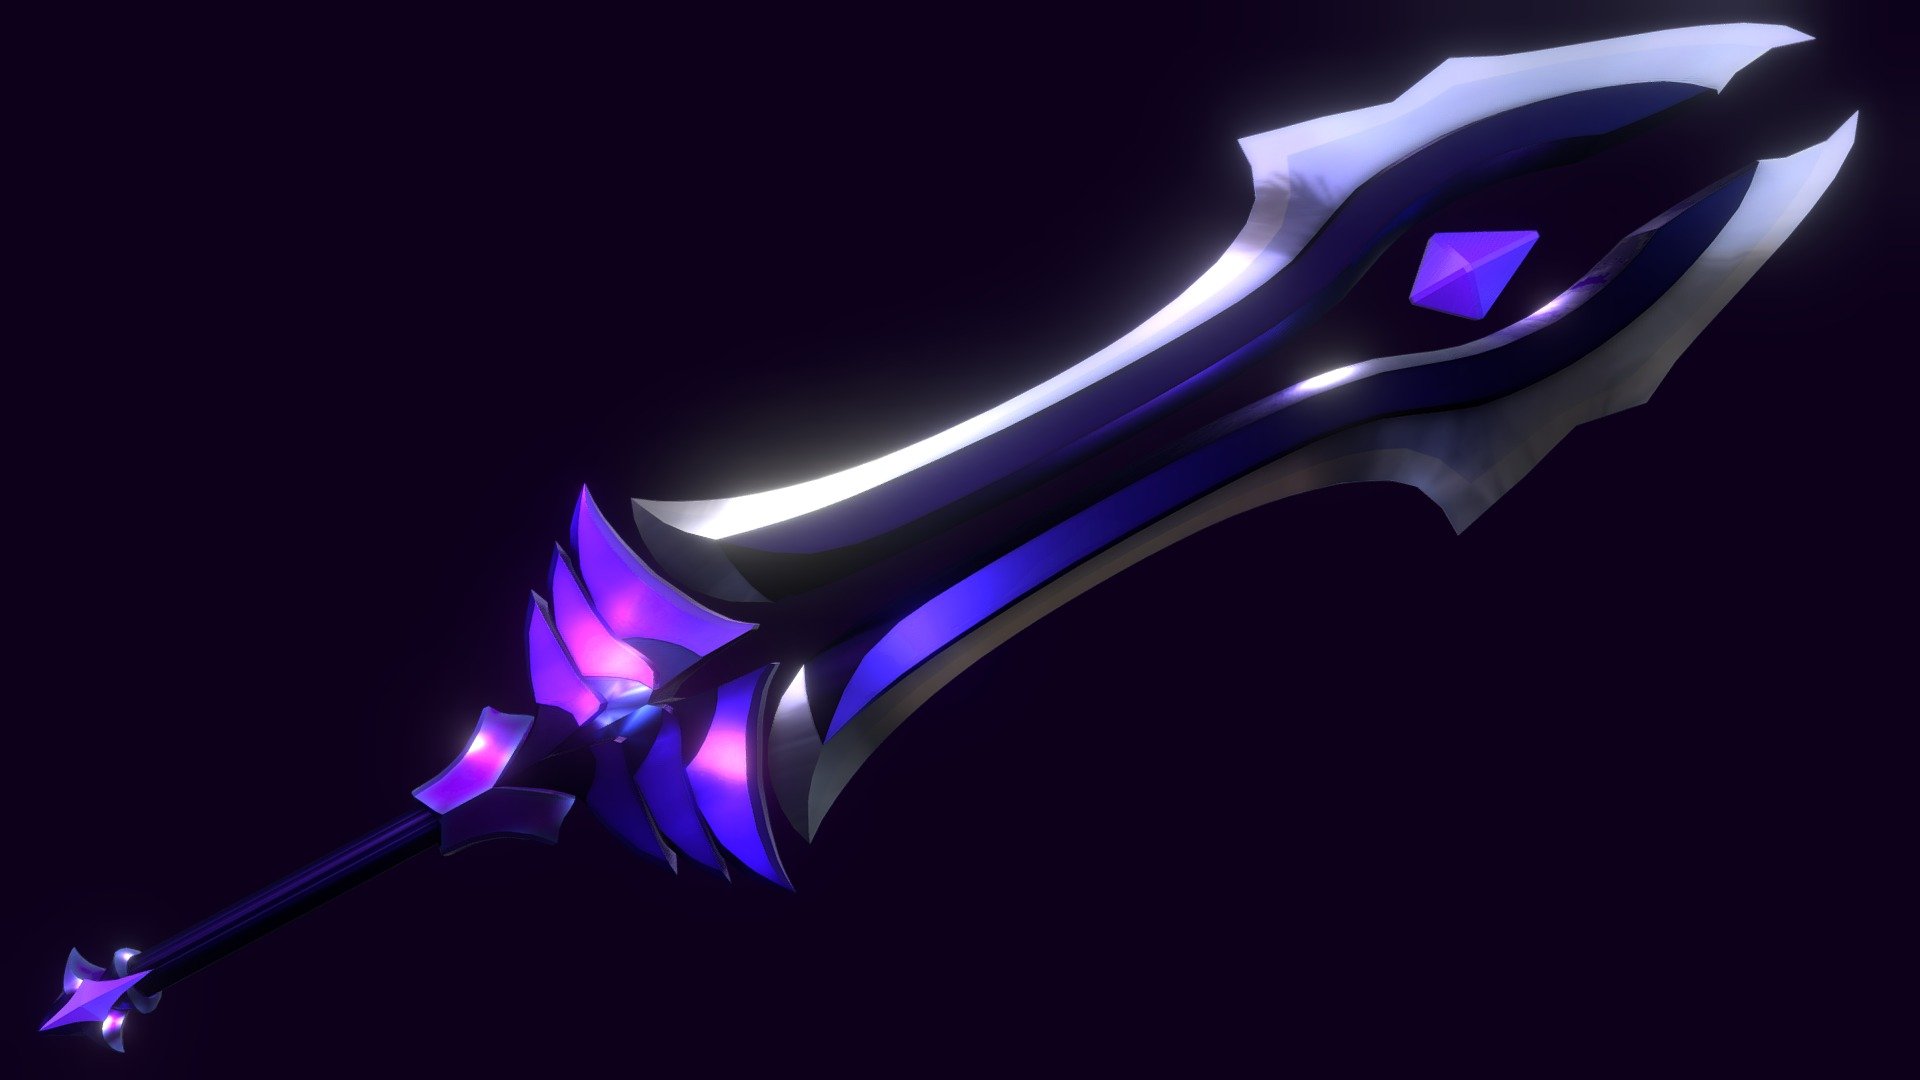 About the model: This is a double-bladed, single-edged fantasy sword that features a large magic crystal suspended between the blades, as well as two smaller ones at the end of the handle. It was designed around the idea of a magic, sword-hielding assassin.

Topology: Quads.

Performance: It performs very well in-game, it’s lowpoly and good looking. The textures can be down-scaled from their original 4k resolution to 1k, and it will still have great quality.

Textures: 4k textures of: Color, Metallic, Roughness, Ambient Occlusion, Curvature, Thickness, Position.

UV: UV map unwrapped and packed.

Formats Included: FBX, OBJ, BLEND, GLB, PLY, STL, USDC, X3D, DAE, ABC, MTL 3d model